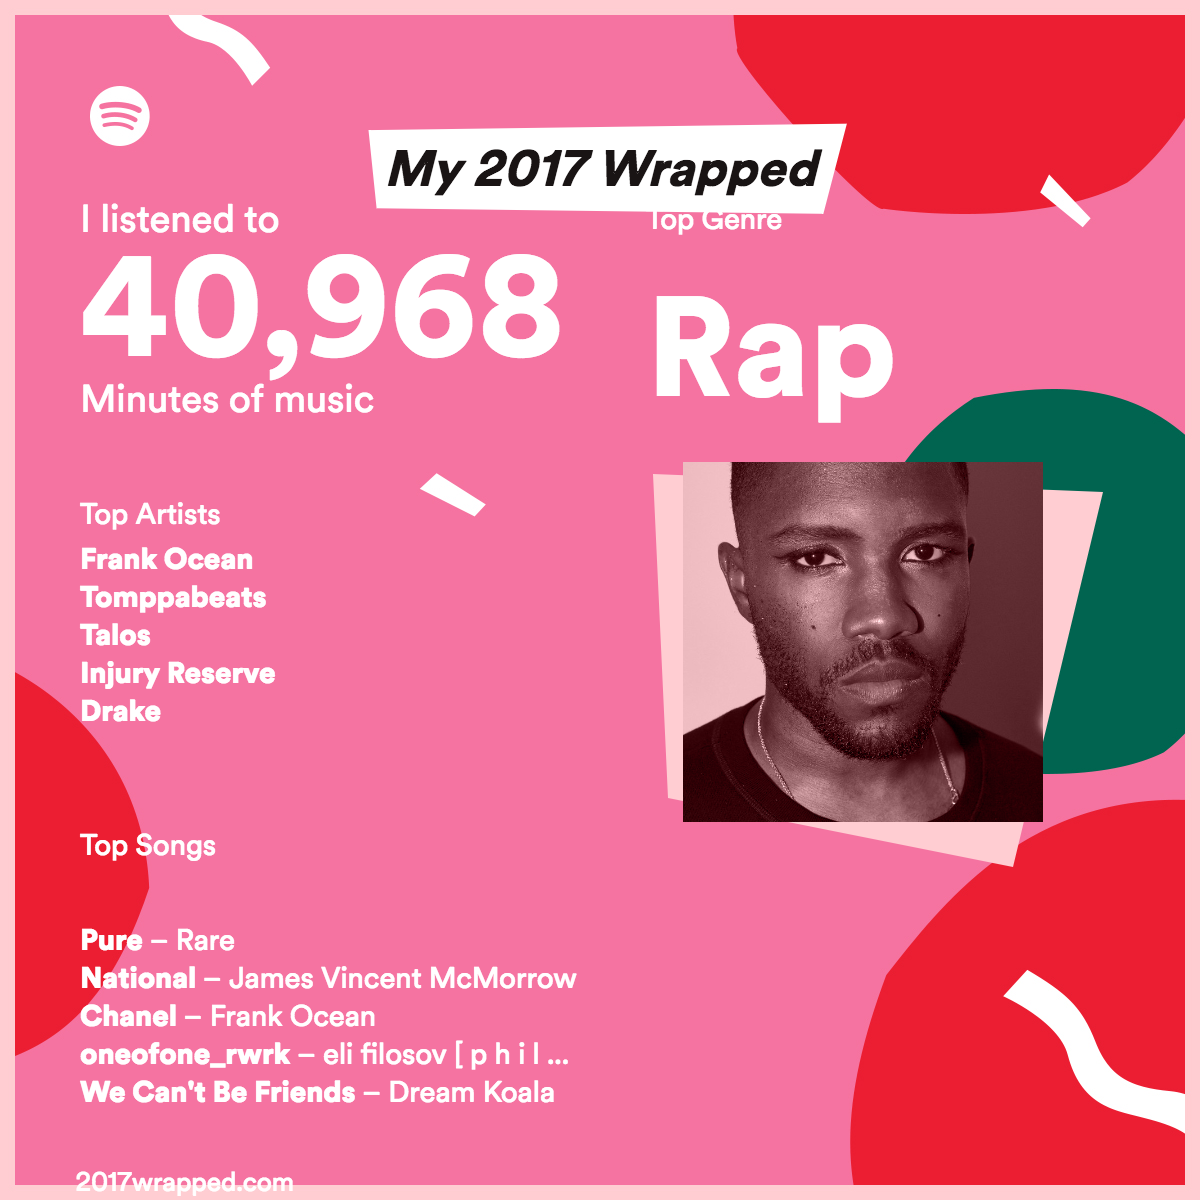 Solved: My wrapped 2017 - The Spotify Community